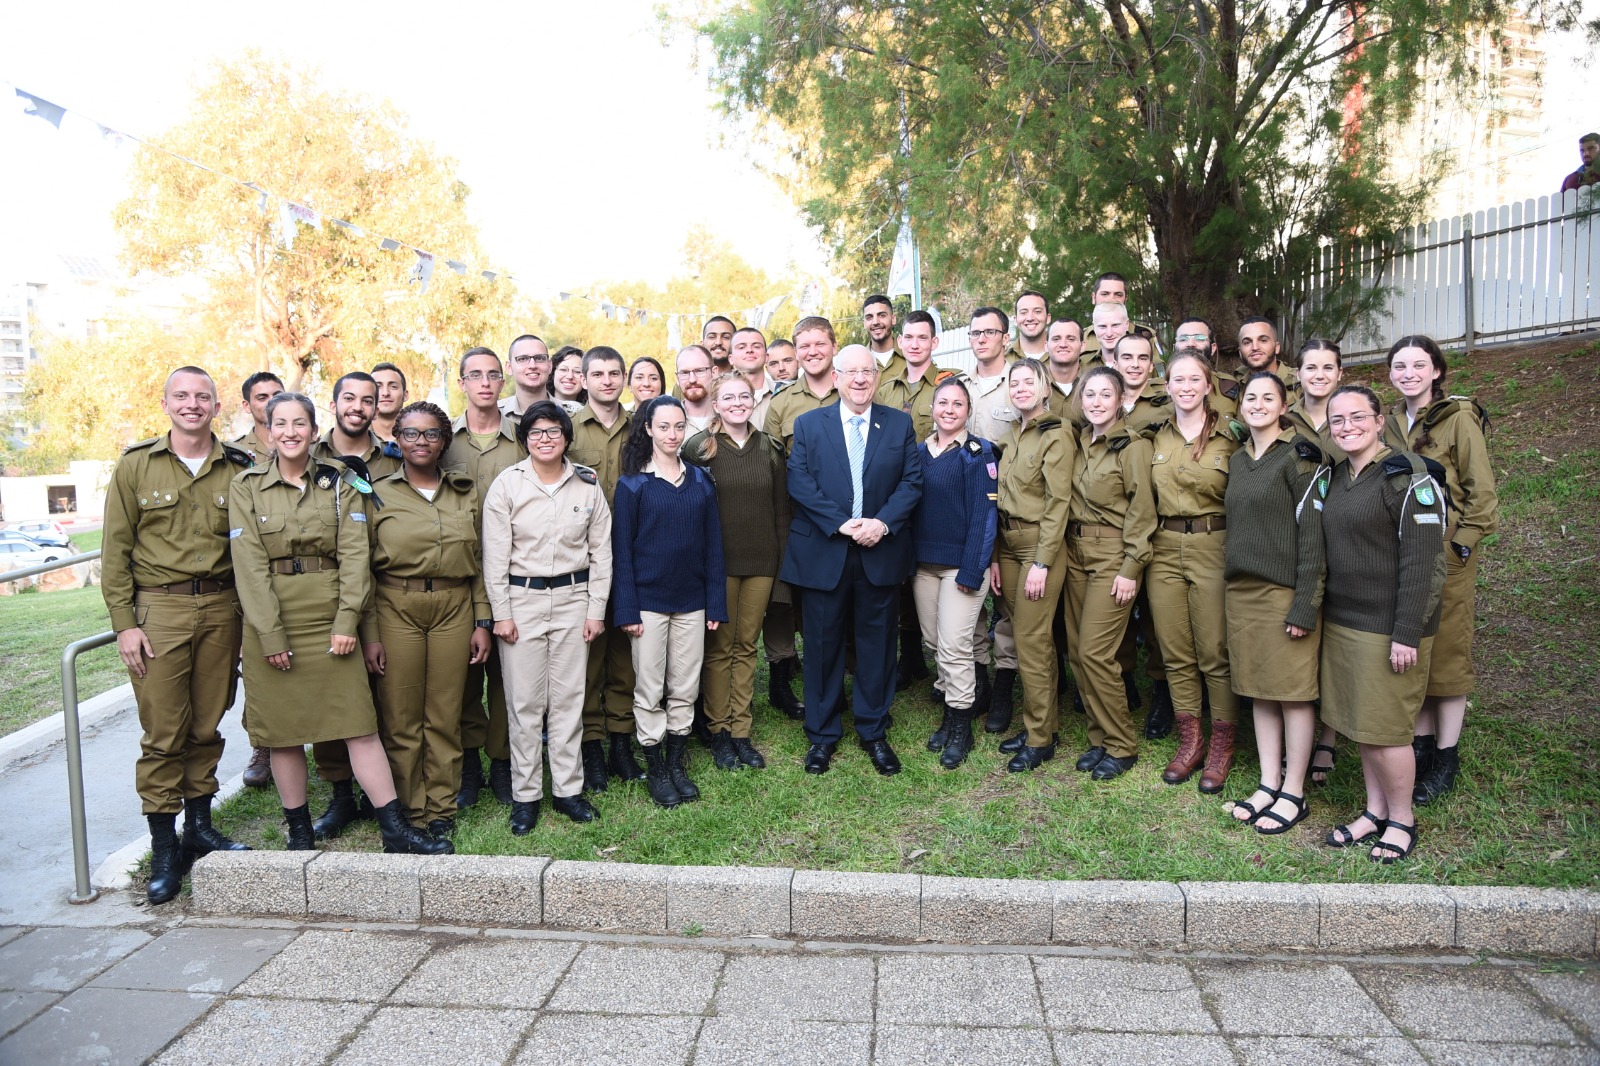 President Rivlin Celebrates Passover Seder with 400 Lone Soldiers